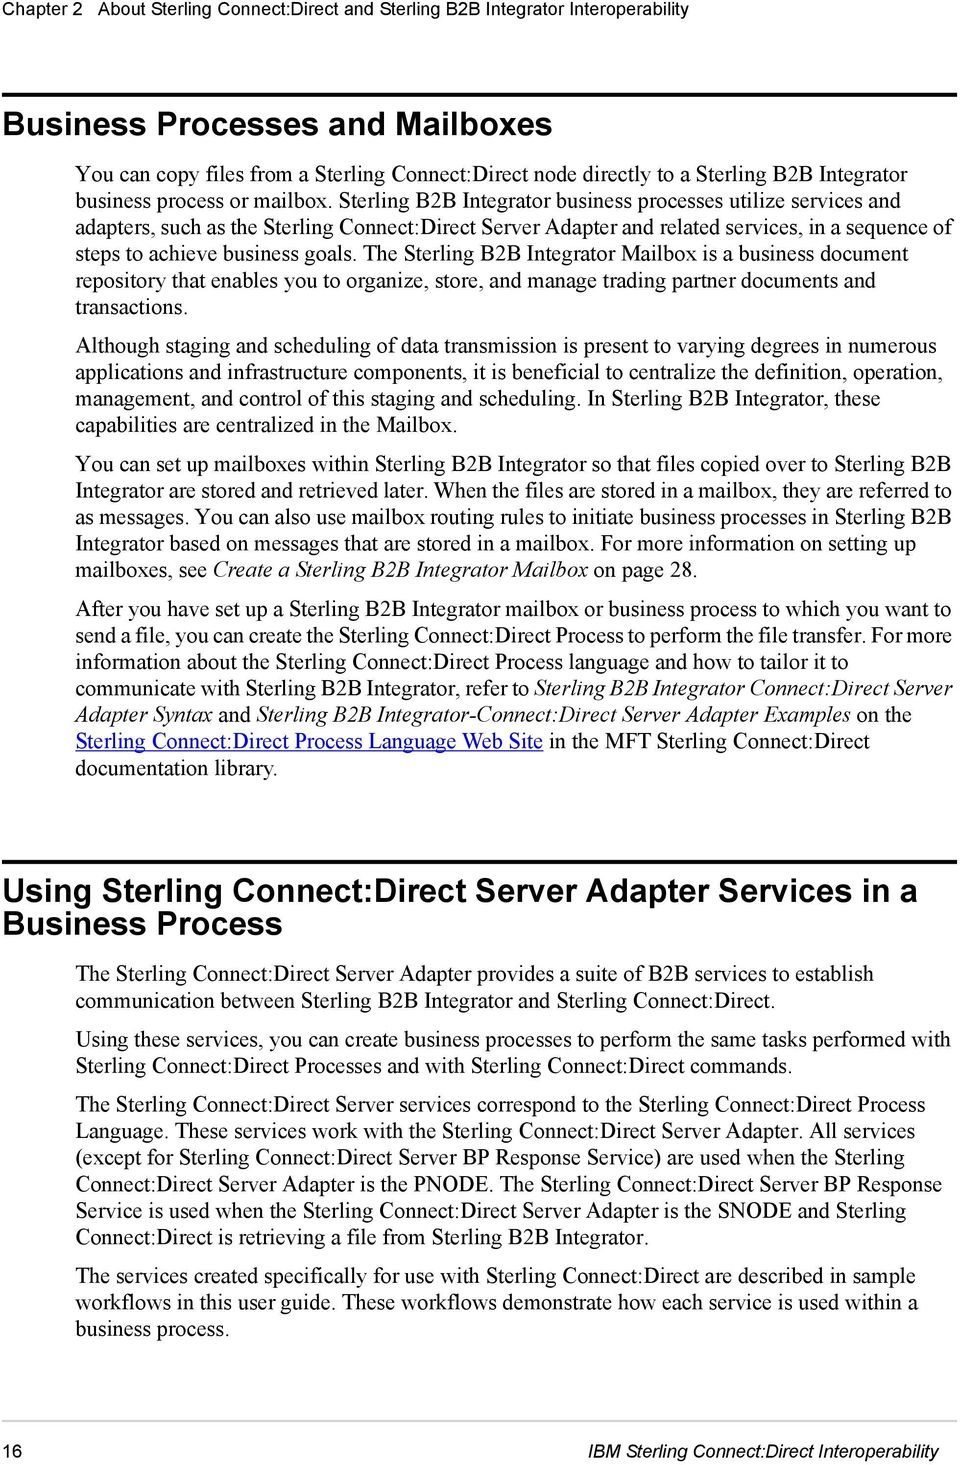 Sterling B2B Integrator business processes utilize services and adapters, such as the Sterling Connect:Direct Server Adapter and related services, in a sequence of steps to achieve business goals.